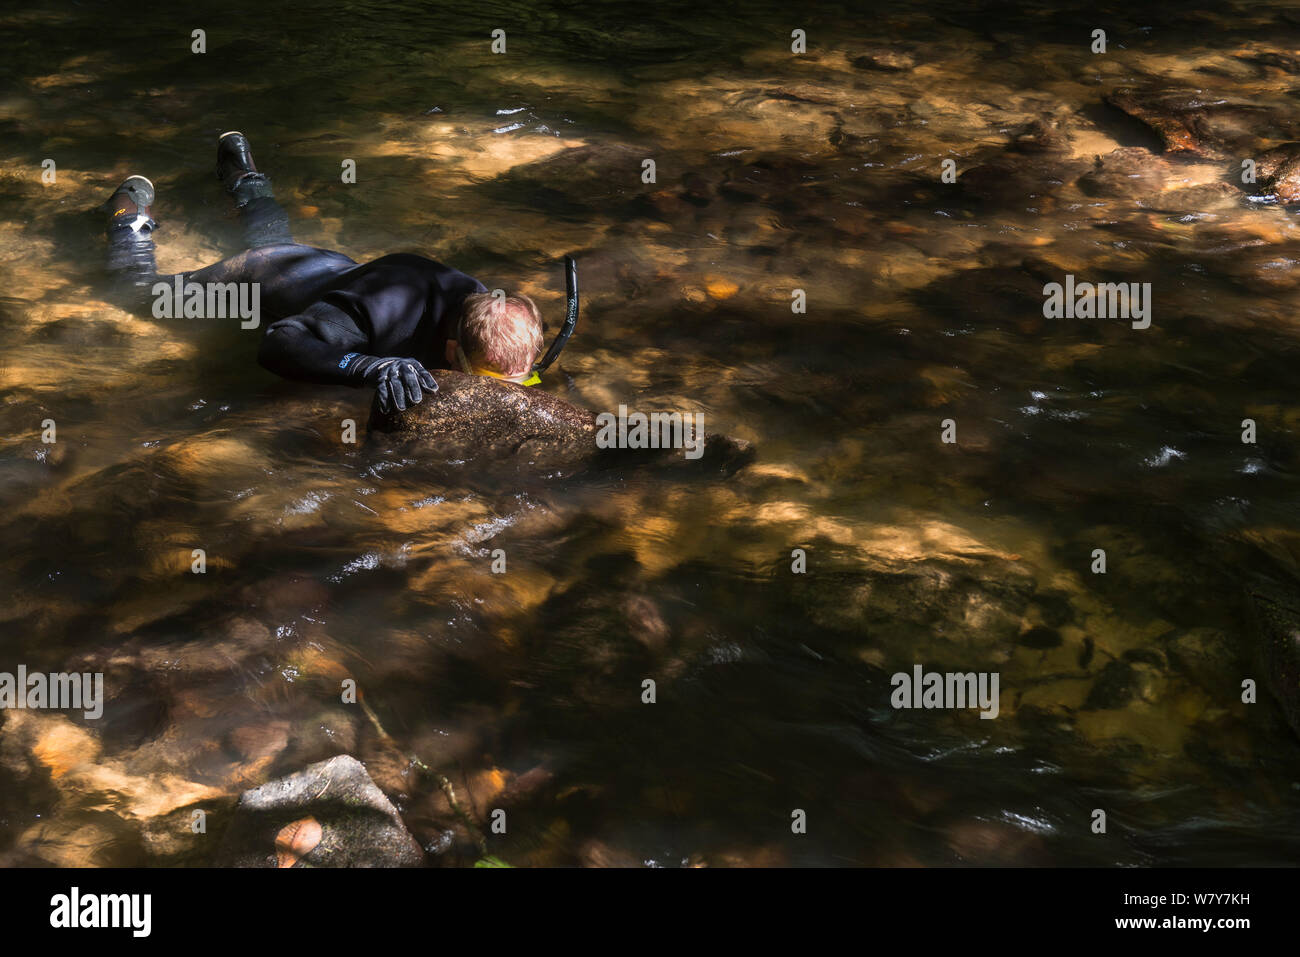 Researcher Stephen Spear snorkeling in river, looking for Eastern hellbenders (Cryptobranchus alleganiensis). Cooper&#39;s Creek, Chattahoochee National Forest, Georgia, USA, July 2014. Stock Photo